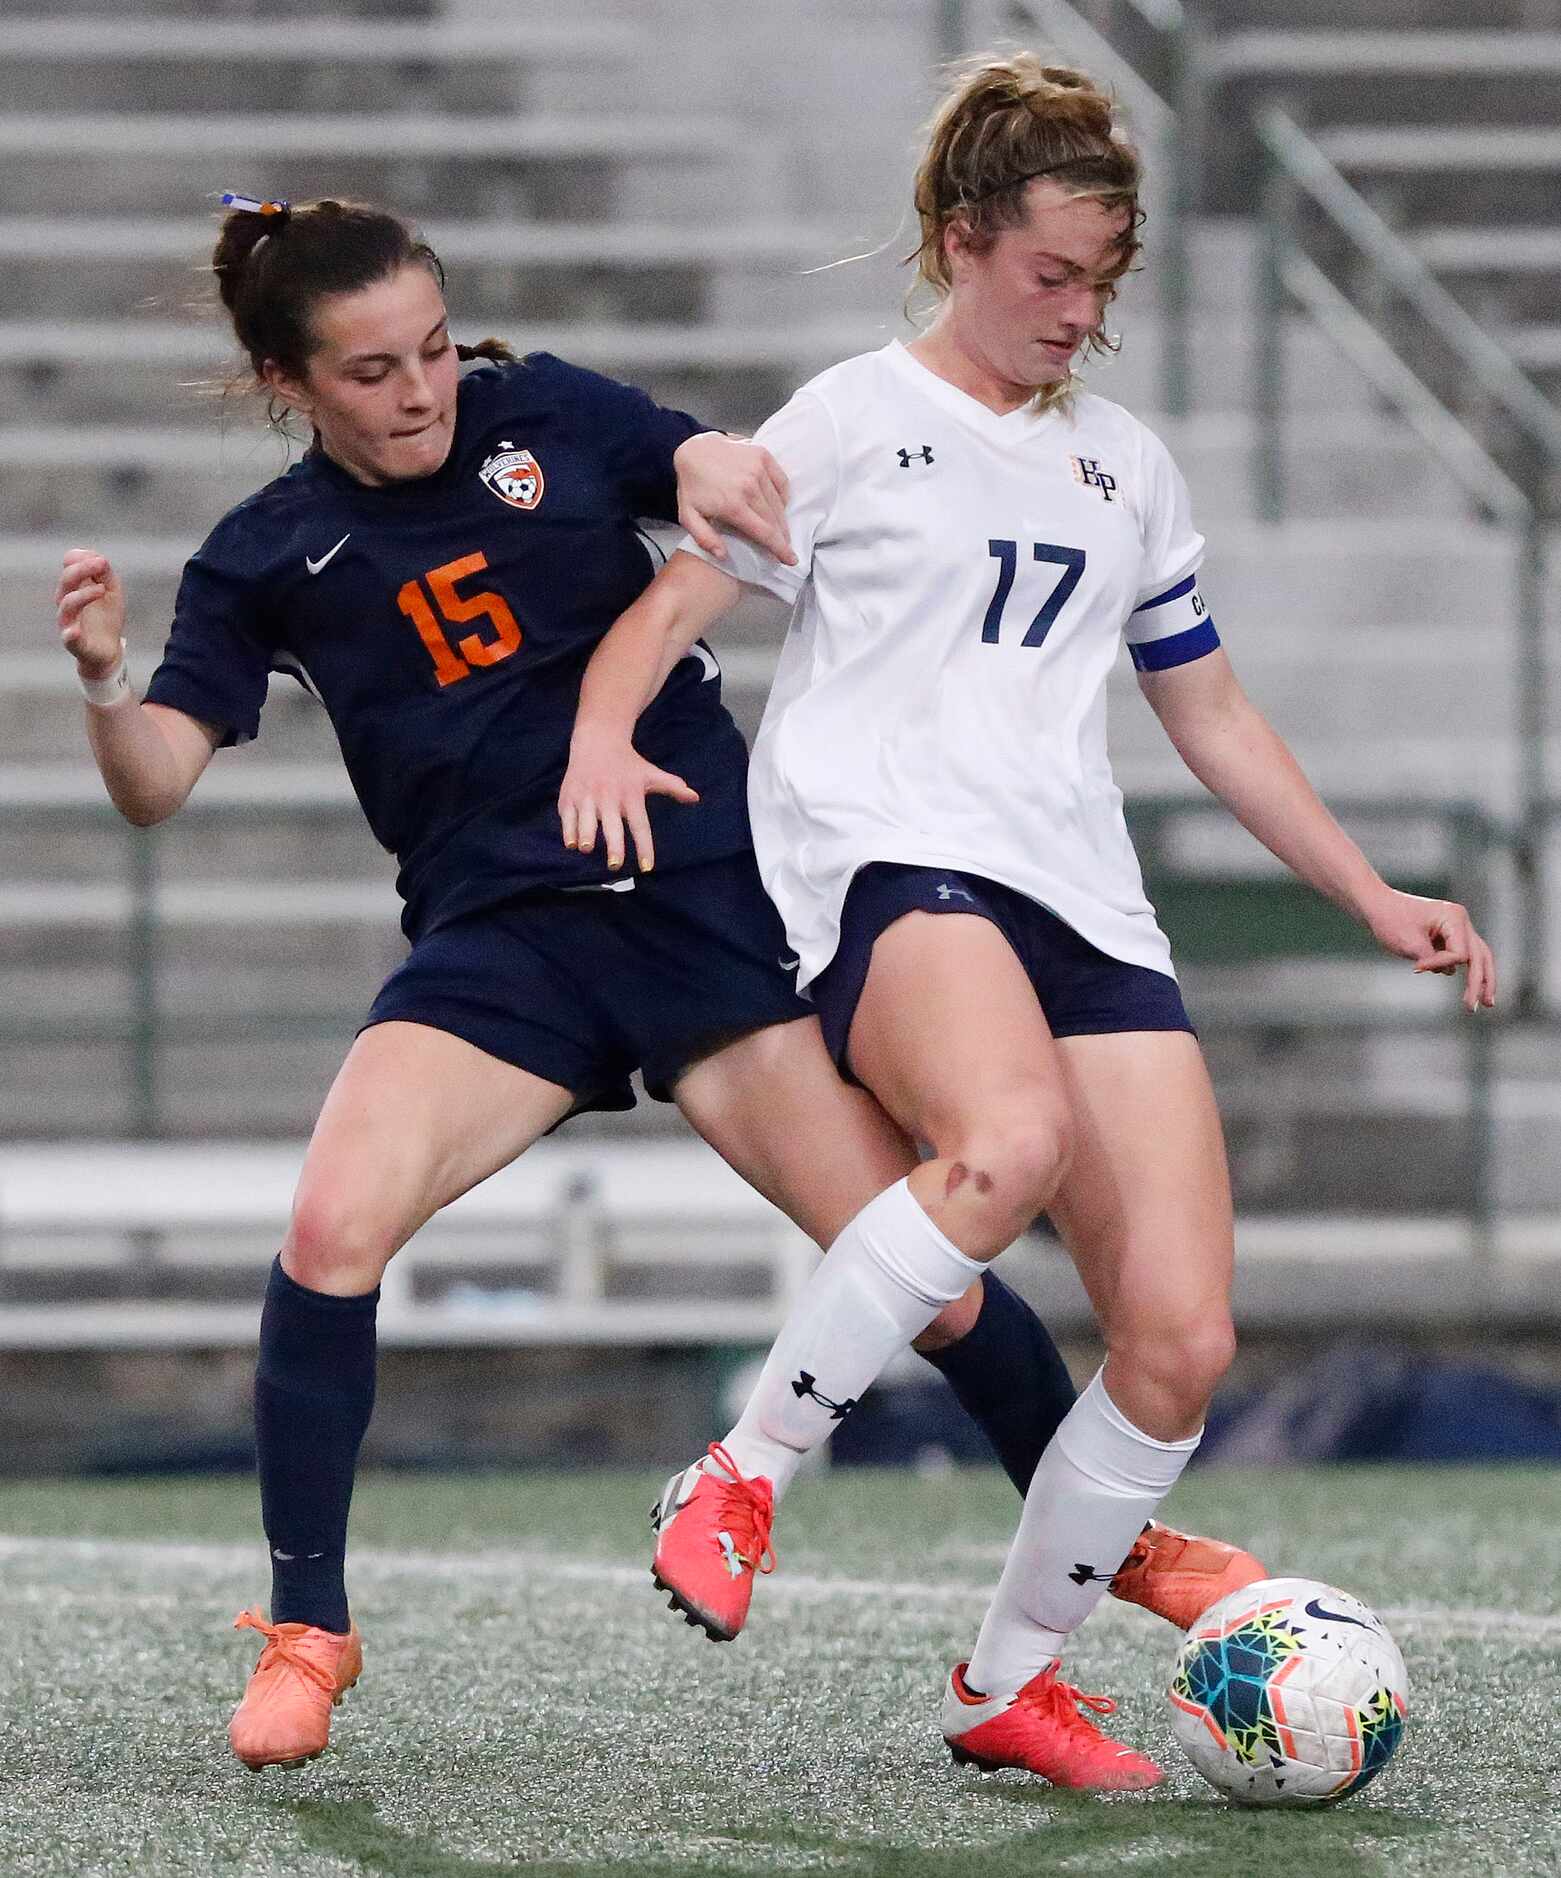 Wakeland midfielder Allie Perry (15) is sheilded from the ball by Highland Park defender...